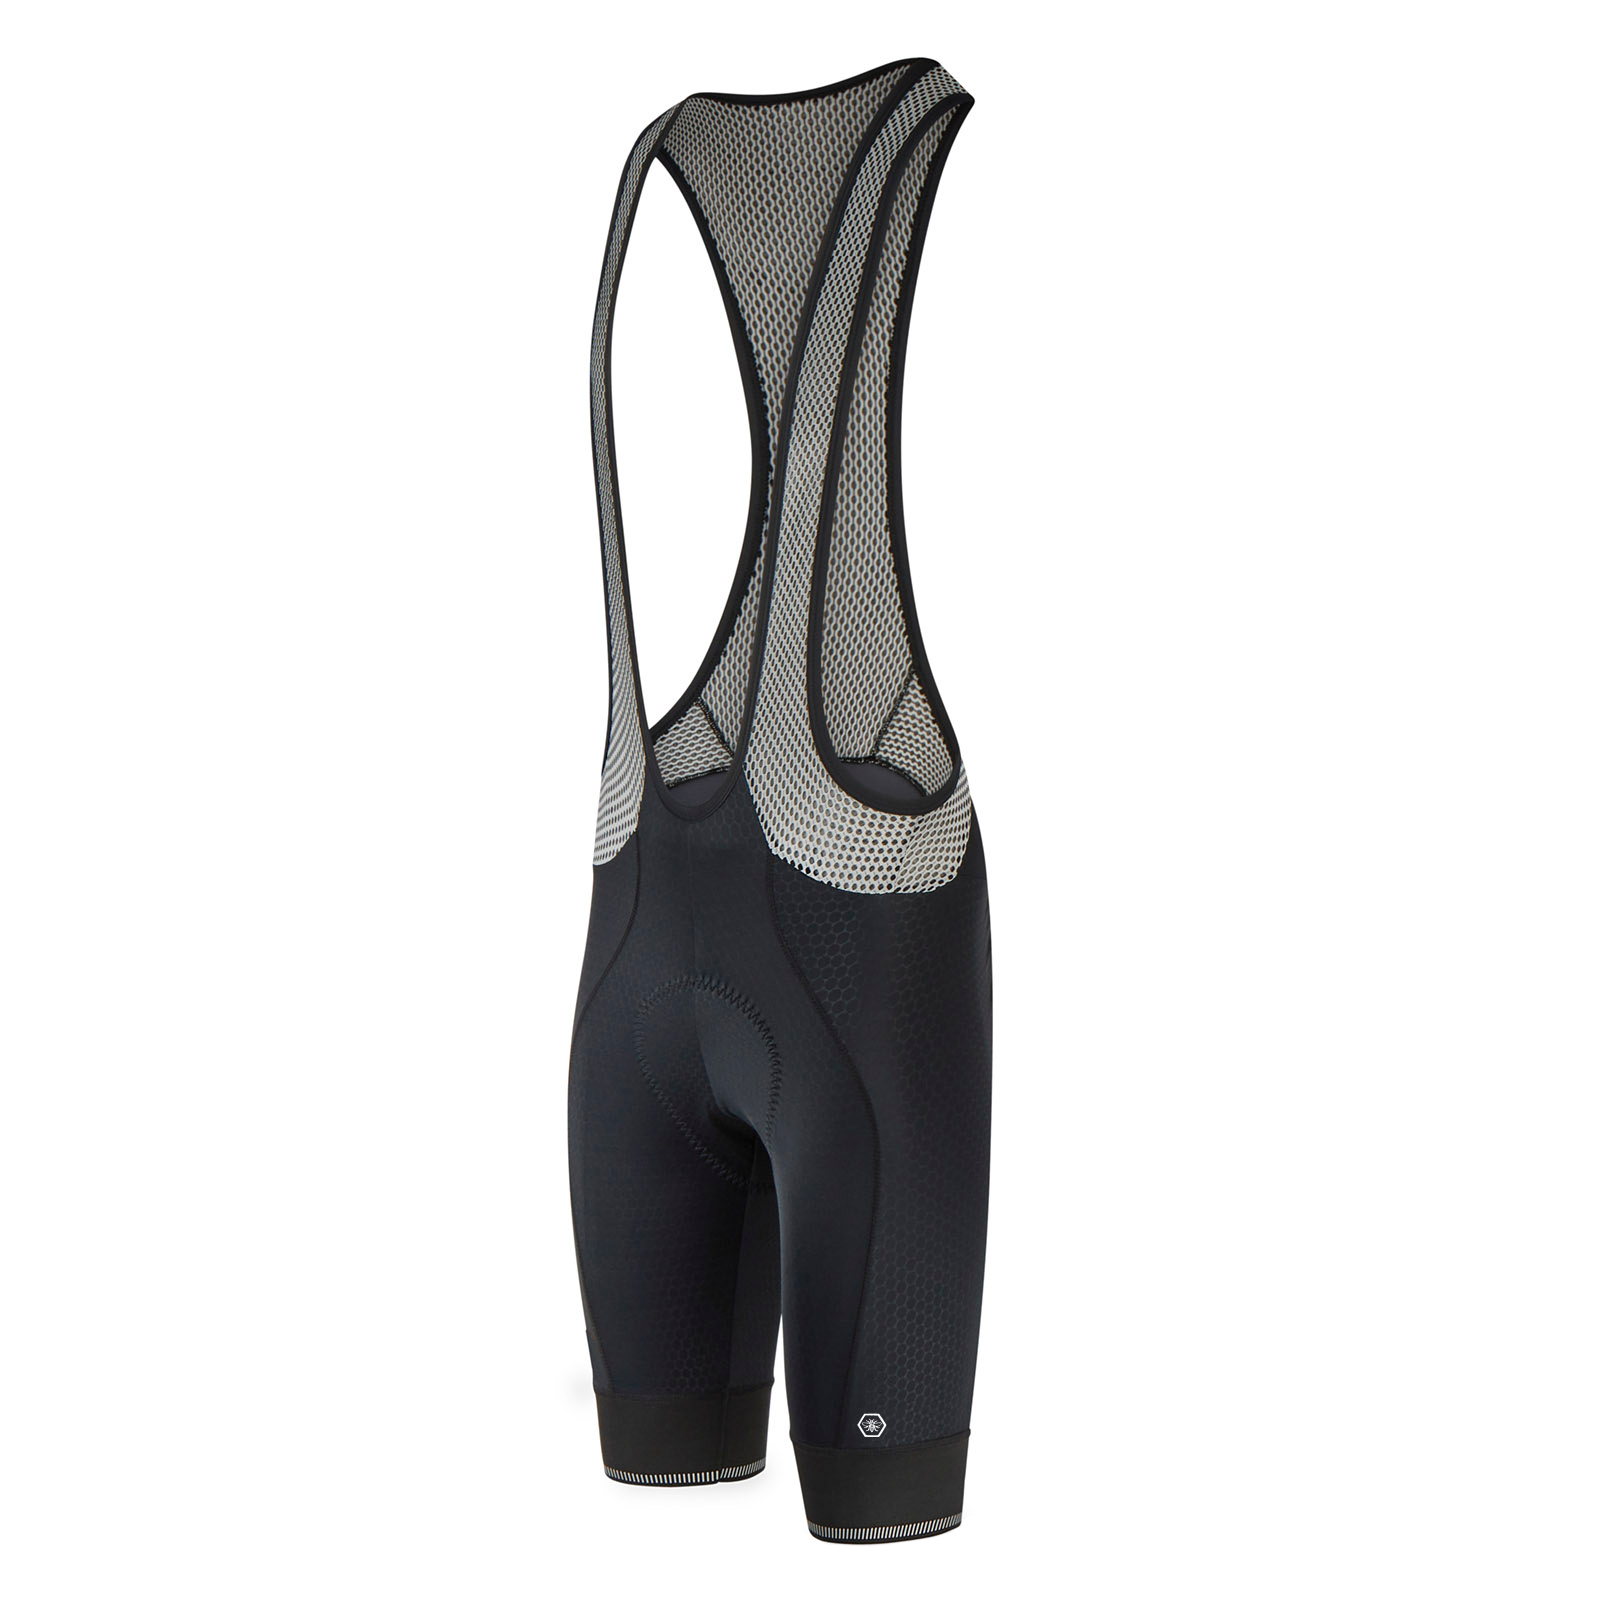 Perform Carbon Bib Shorts - Lusso Cycle Wear